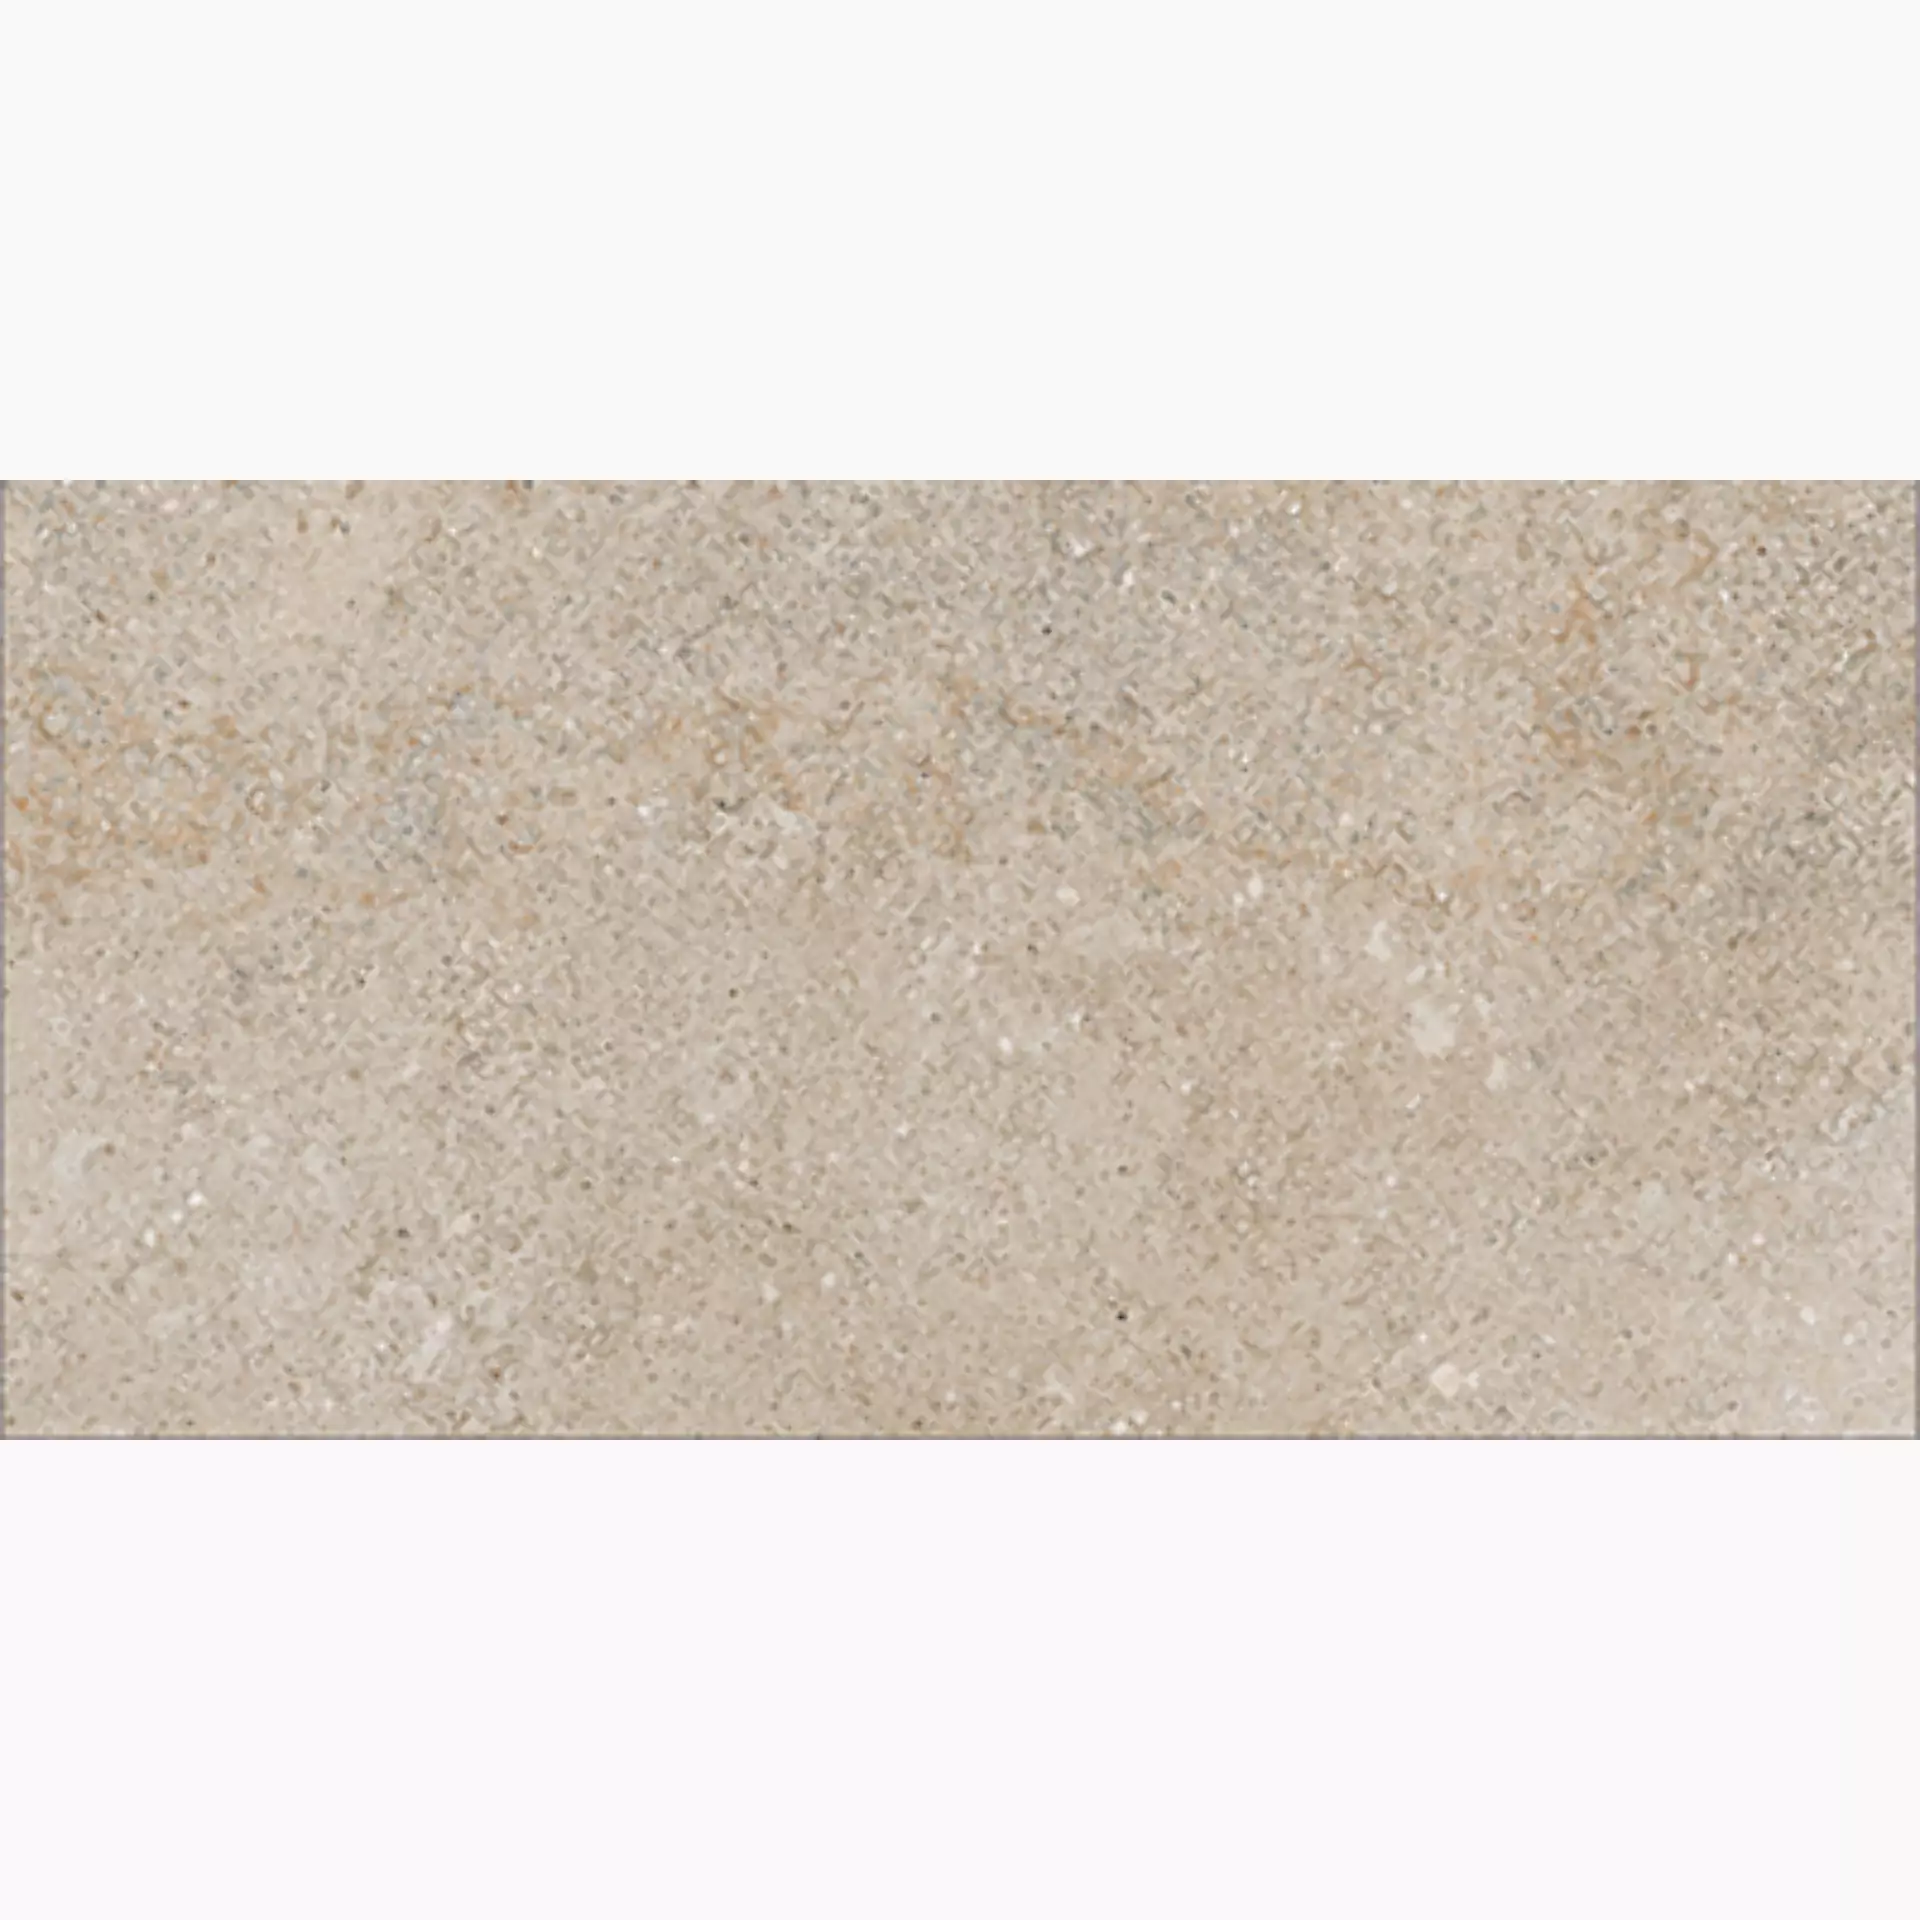 Keope Brystone Gold Strutturato 44593249 30x60cm rectified 9mm